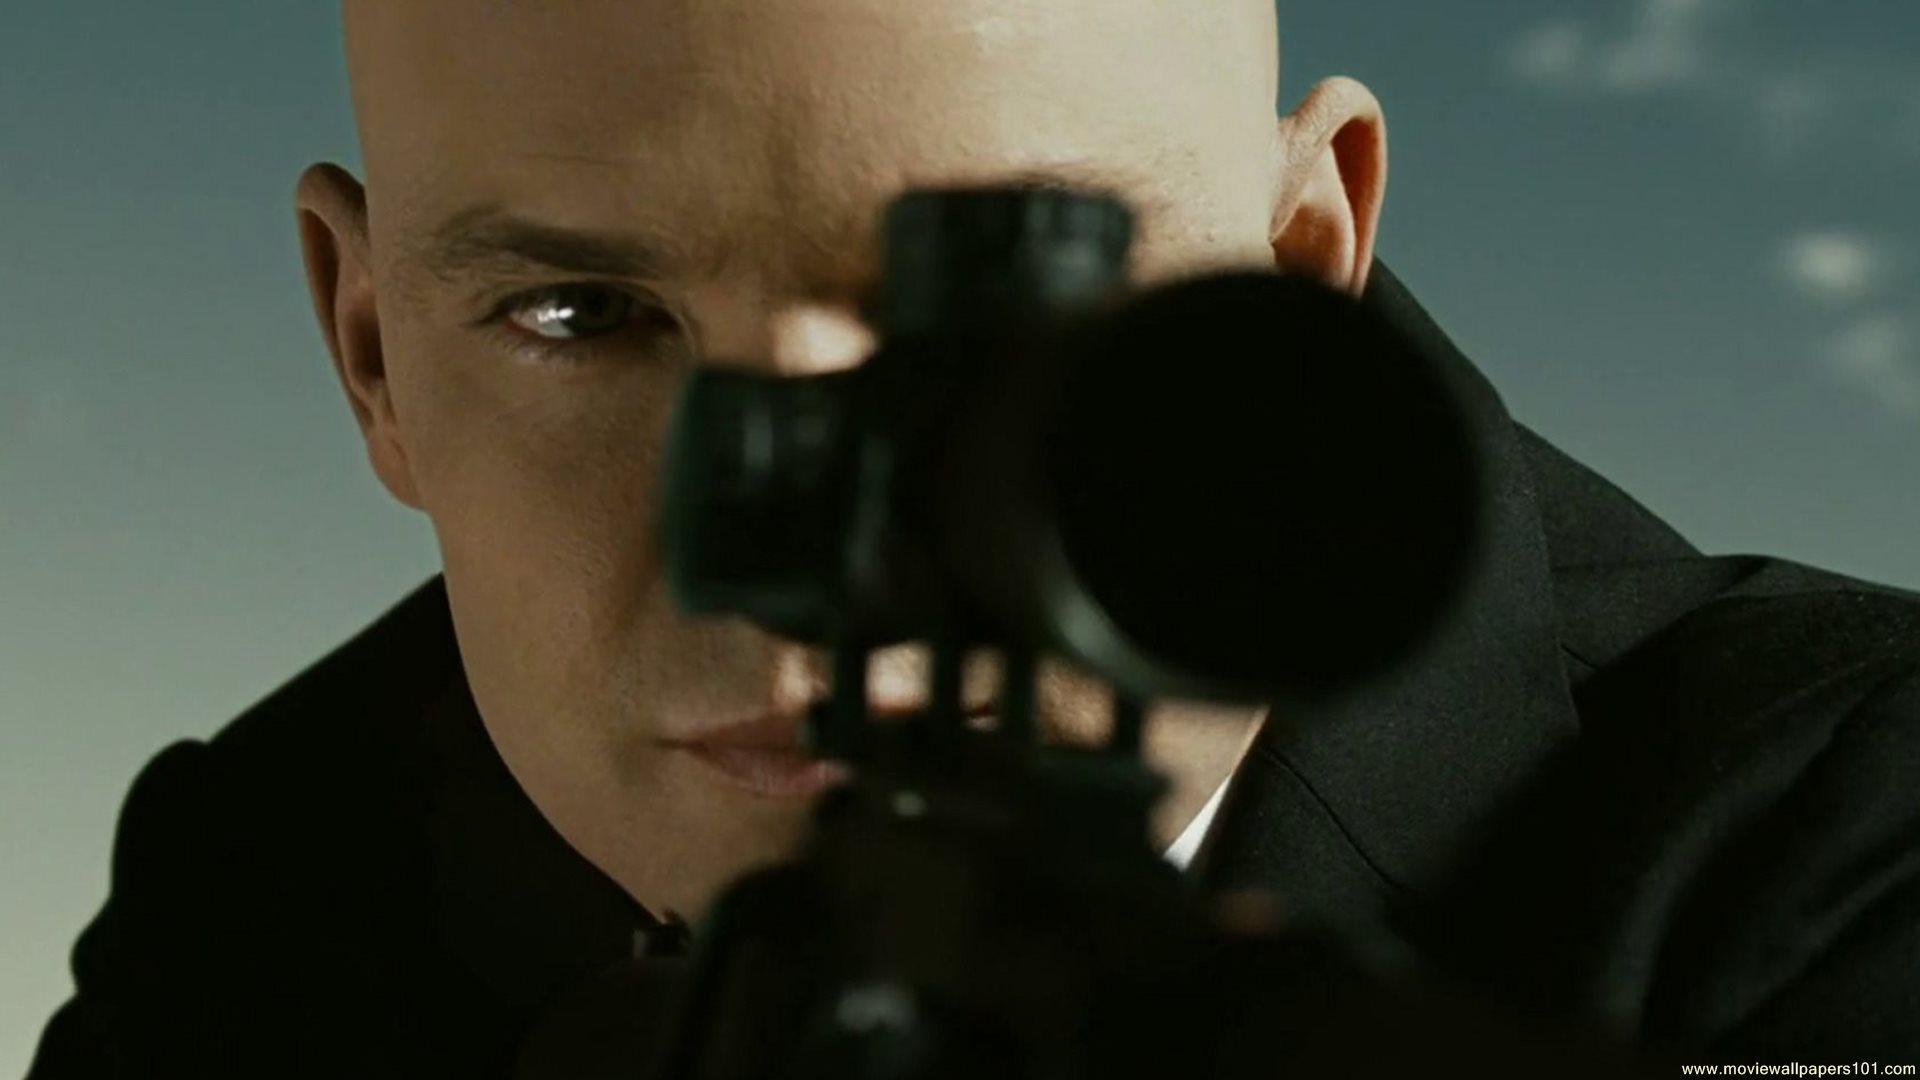 Free Download Download Hitman Agent 47 15 Movie Hd Wallpaper Search More 19x1080 For Your Desktop Mobile Tablet Explore 48 Hitman 16 Wallpapers Hitman Absolution Wallpaper Hitman Wallpaper For Computer Hitman Wallpaper Full Hd